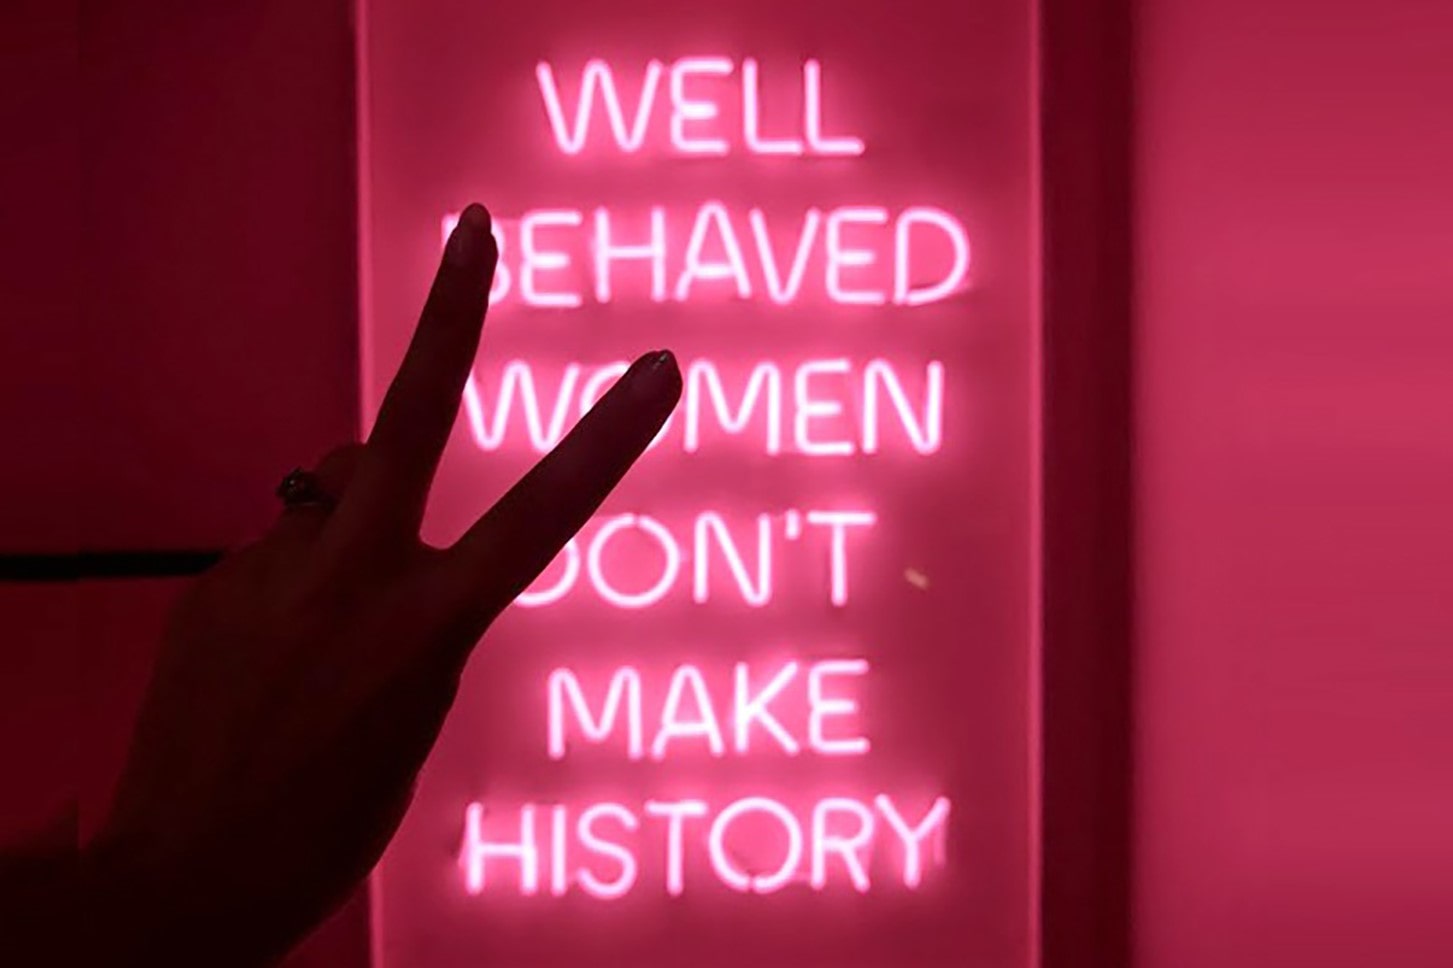 women-throwing-a-piece-sign-in-front-of-neon-pink-well-behaved-women-sign-at-tonight-josephine